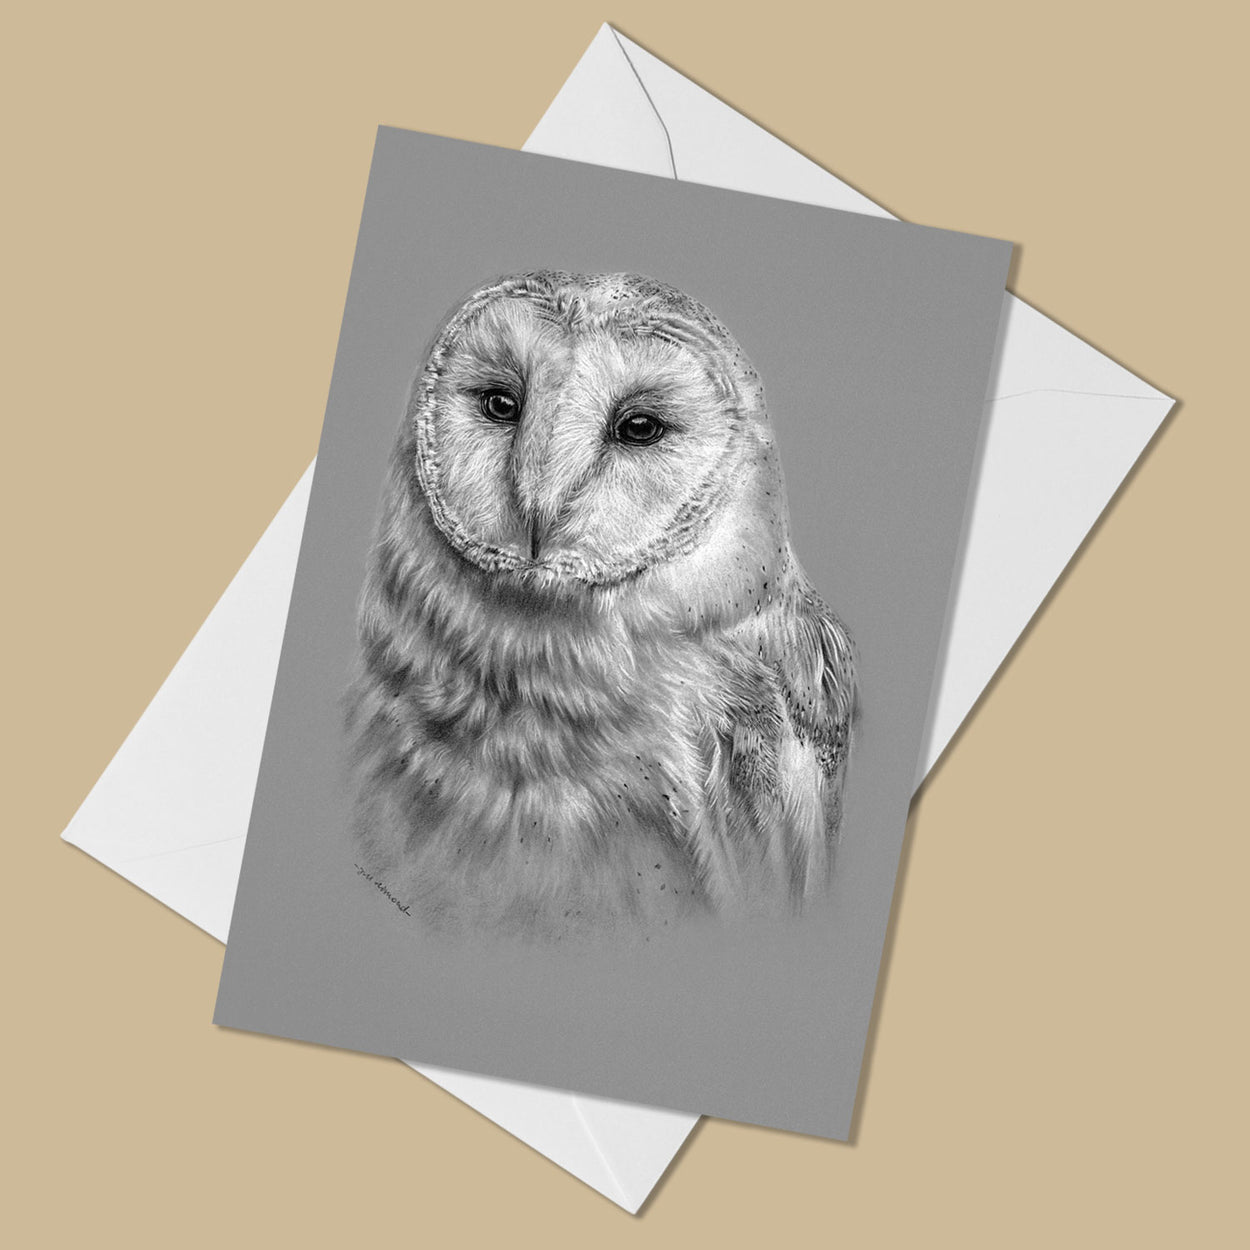 Barn Owl Greeting Card - The Thriving Wild